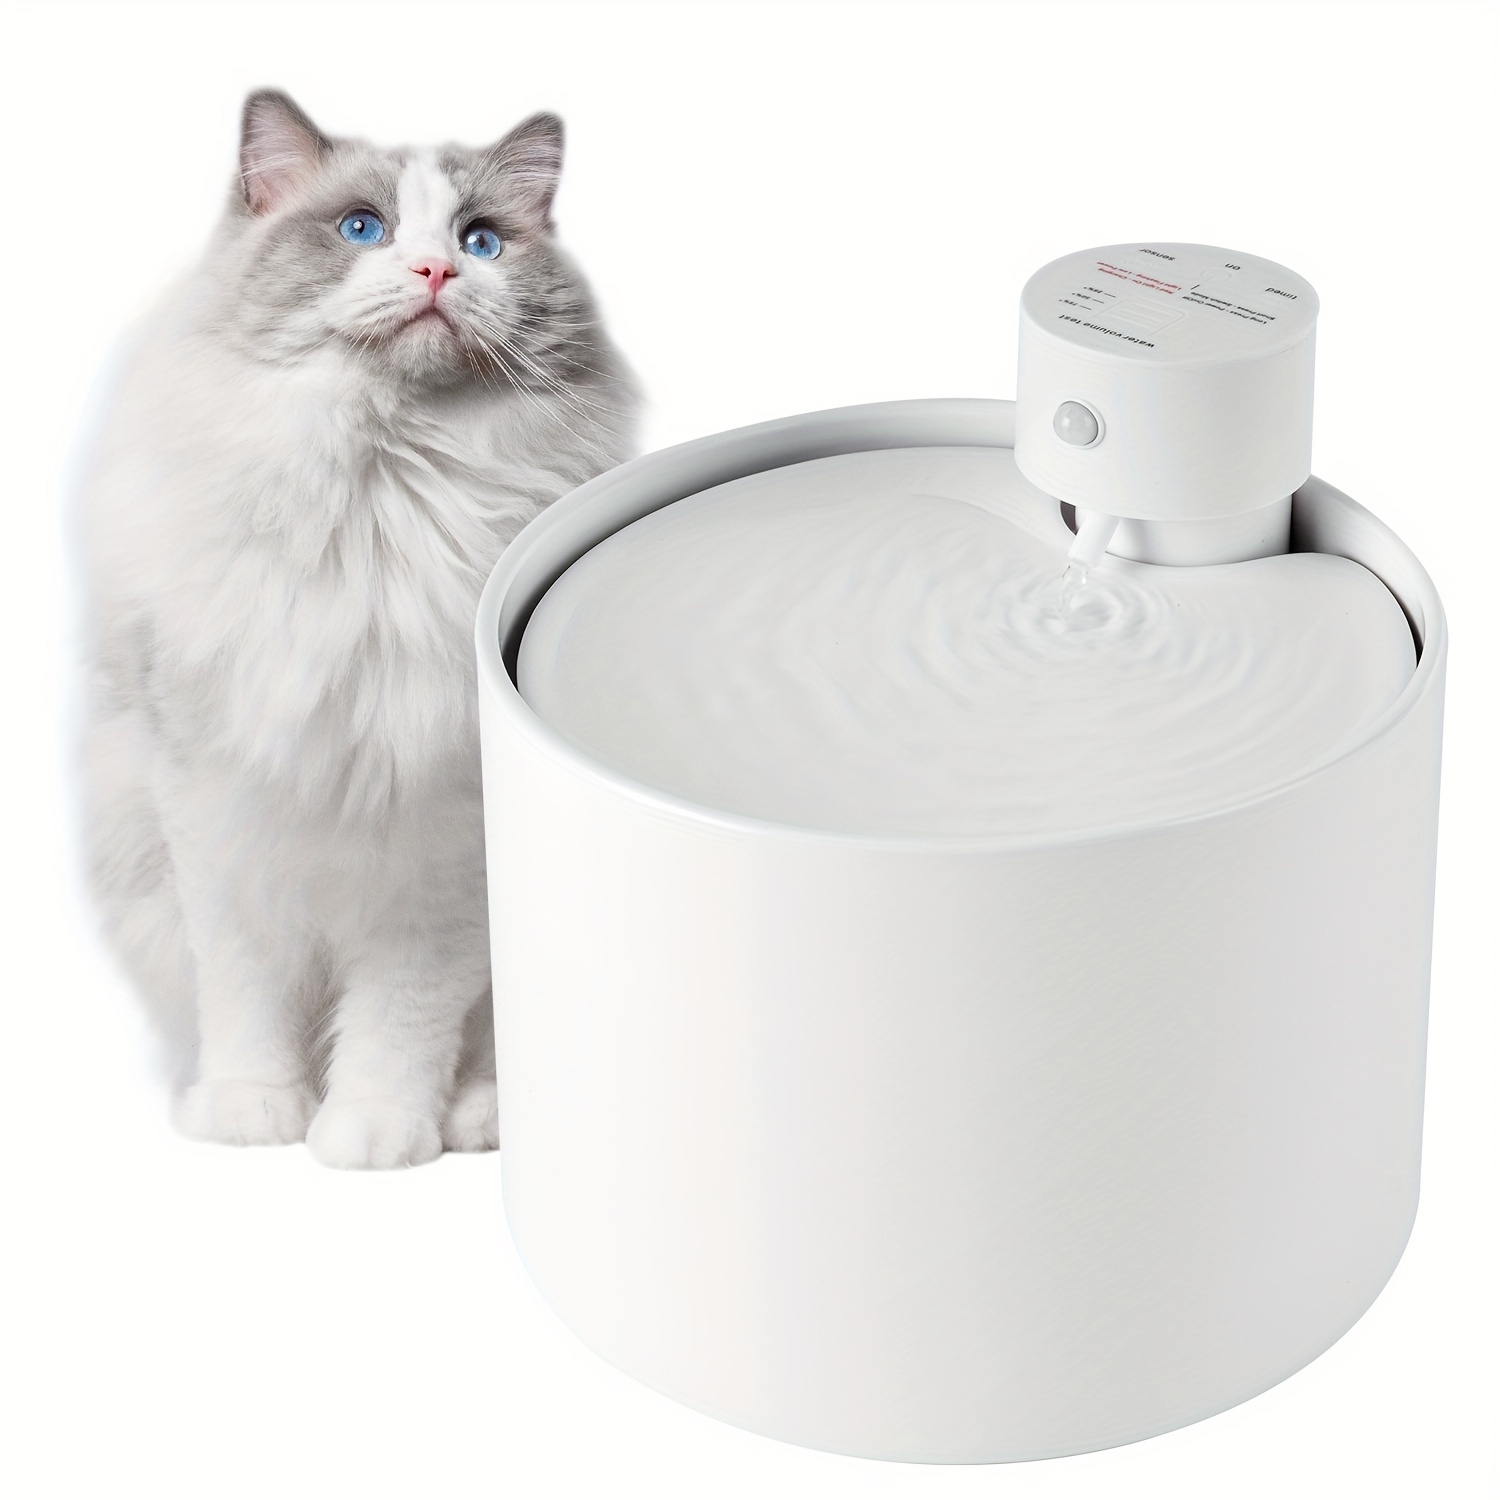 

Ceramic Wireless Cat Water Fountain - Cordless Cat Water Dispenser Battery Operated - Automatic Pet Water Fountain For Cats - Cat Waterer With Filters - Cat Watering Fountains For Drinking - 68oz/2.3l